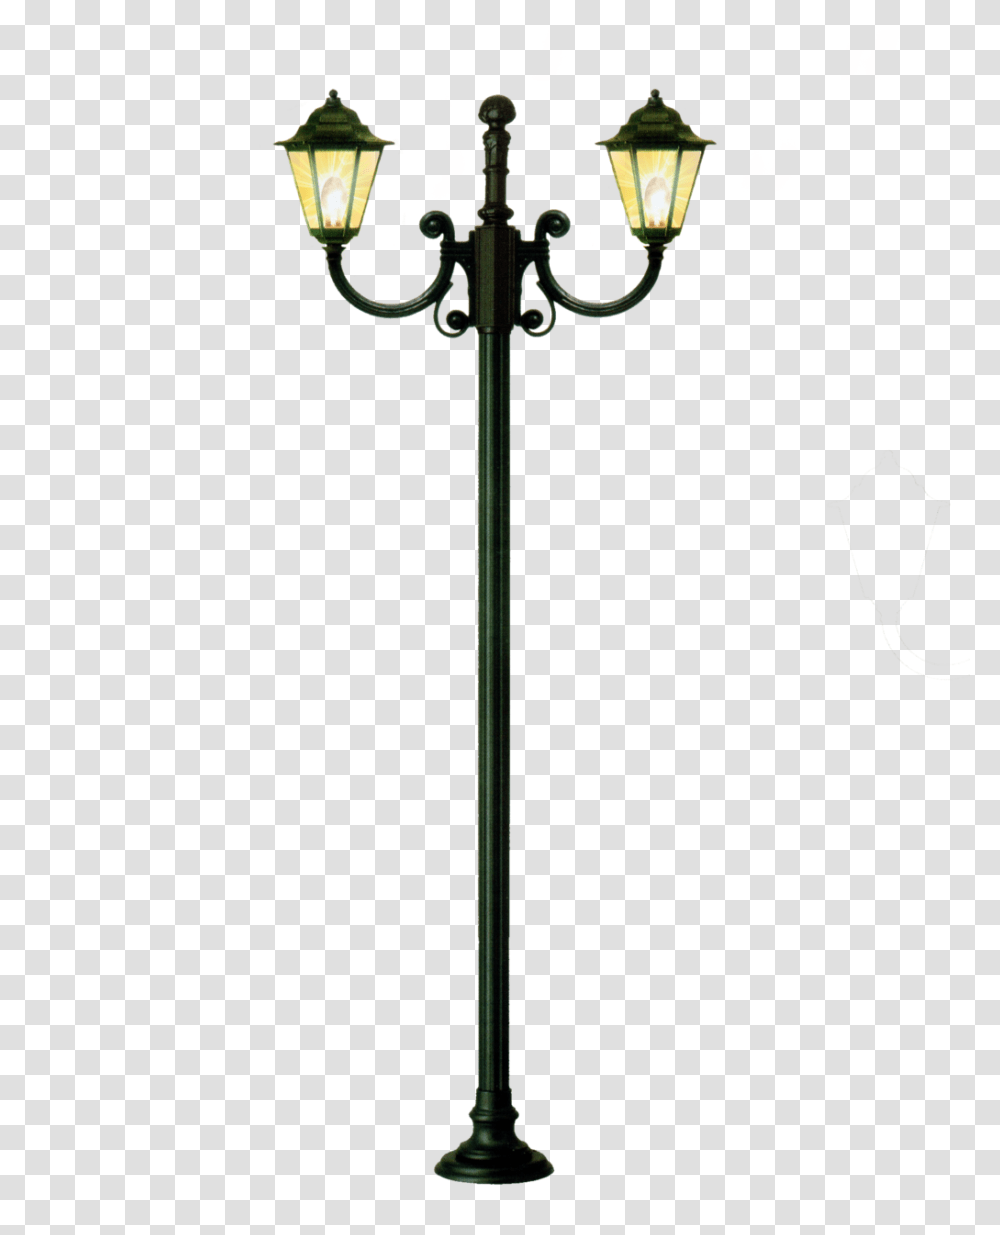 Street Light Images Free Download, Lamp Post, Cross, Lampshade Transparent Png